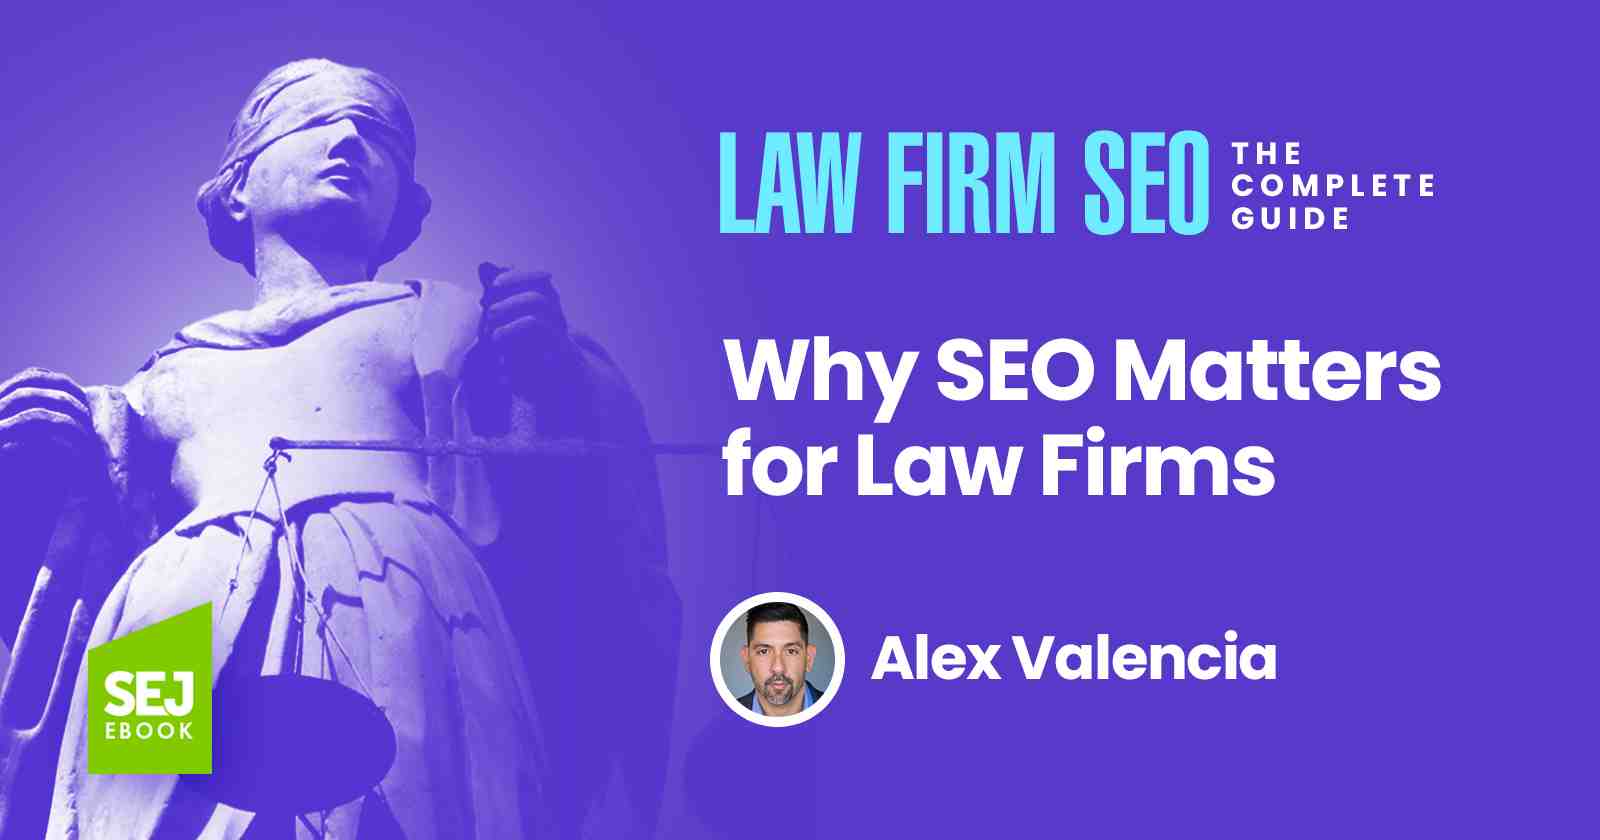 5 Benefits of SEO for Law Firms